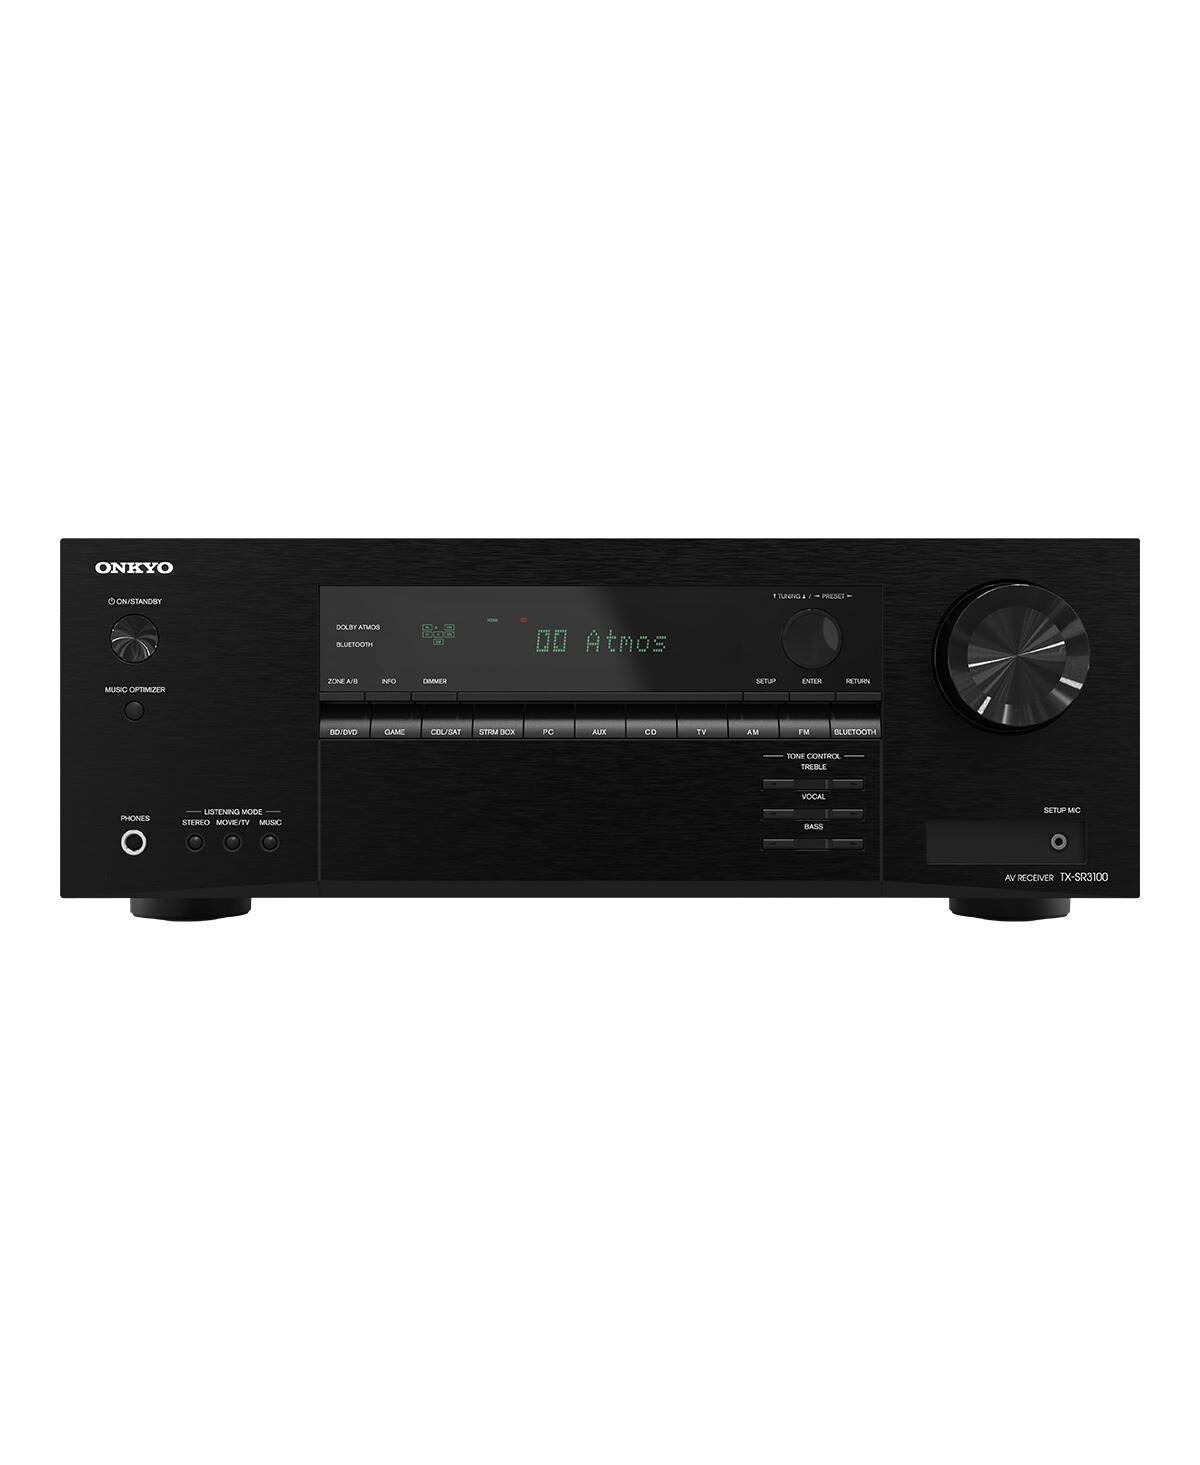 Onkyo Tx-SR3100 Home Theater Av Receiver with Bluetooth, Dolby Atmos, and Dts-x (Black) - Black